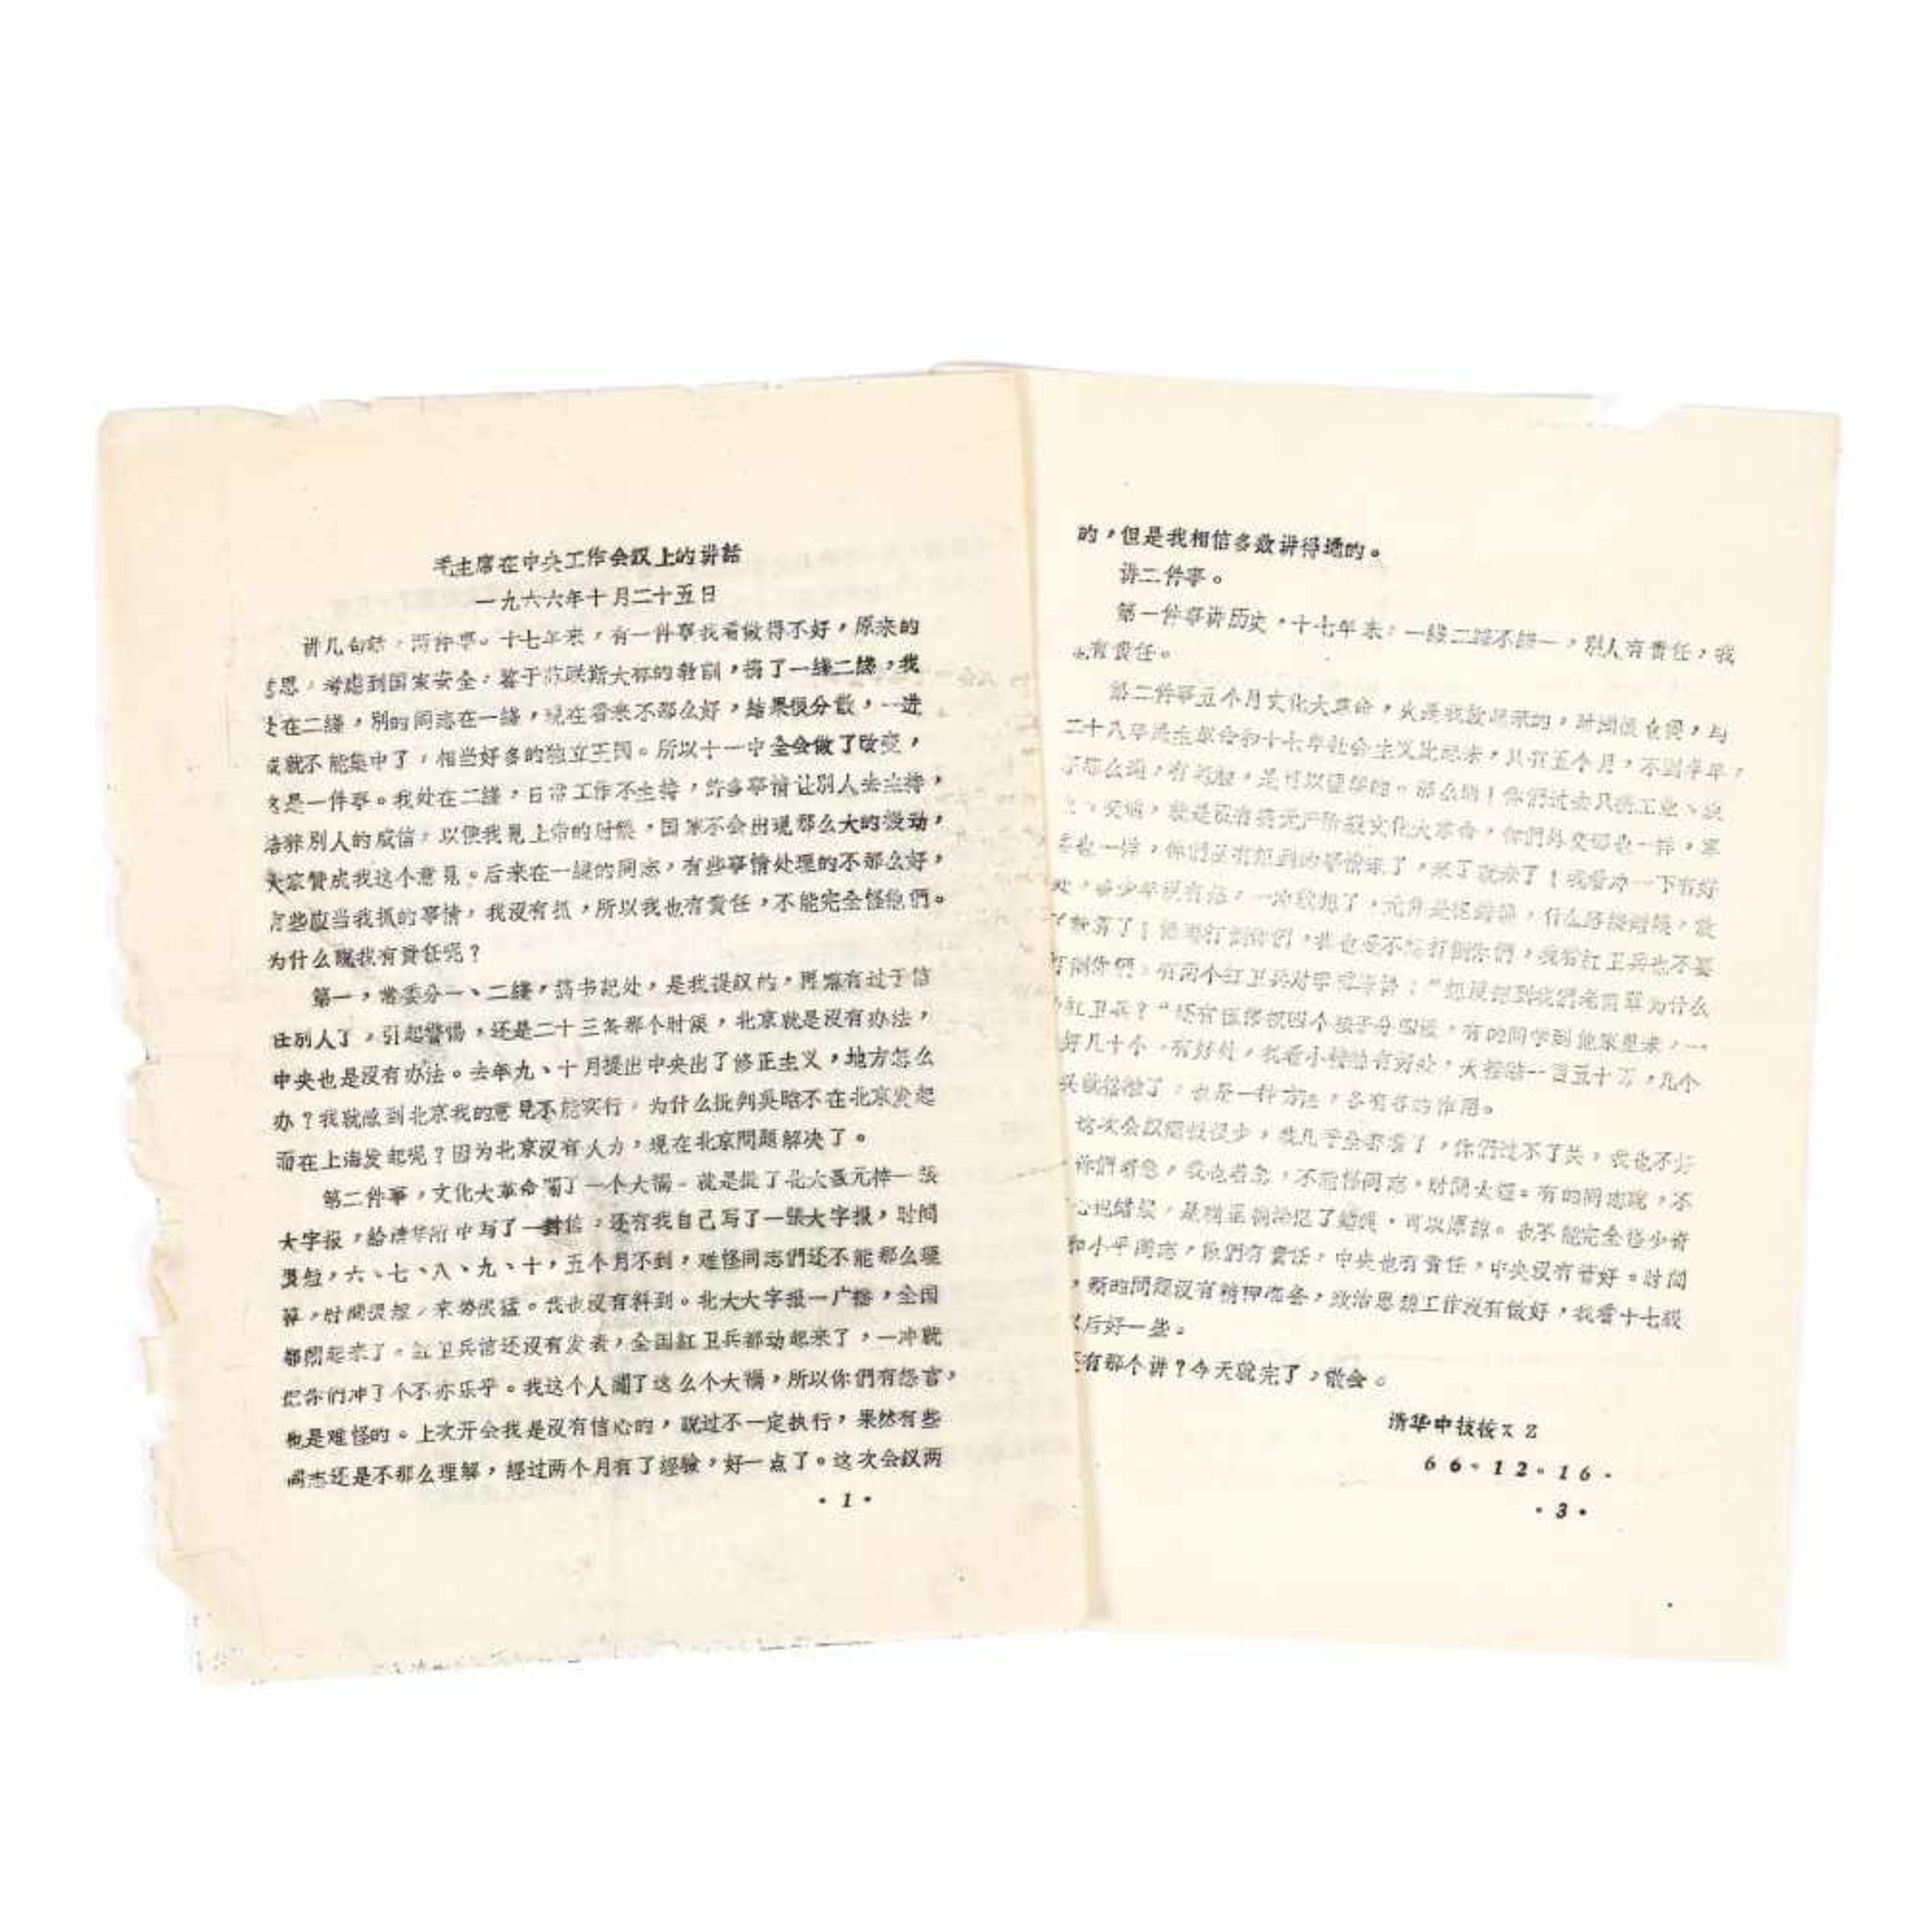 Transcript of a speech by Mao Zedong, leader of the Communist Party of China, during a party meeting